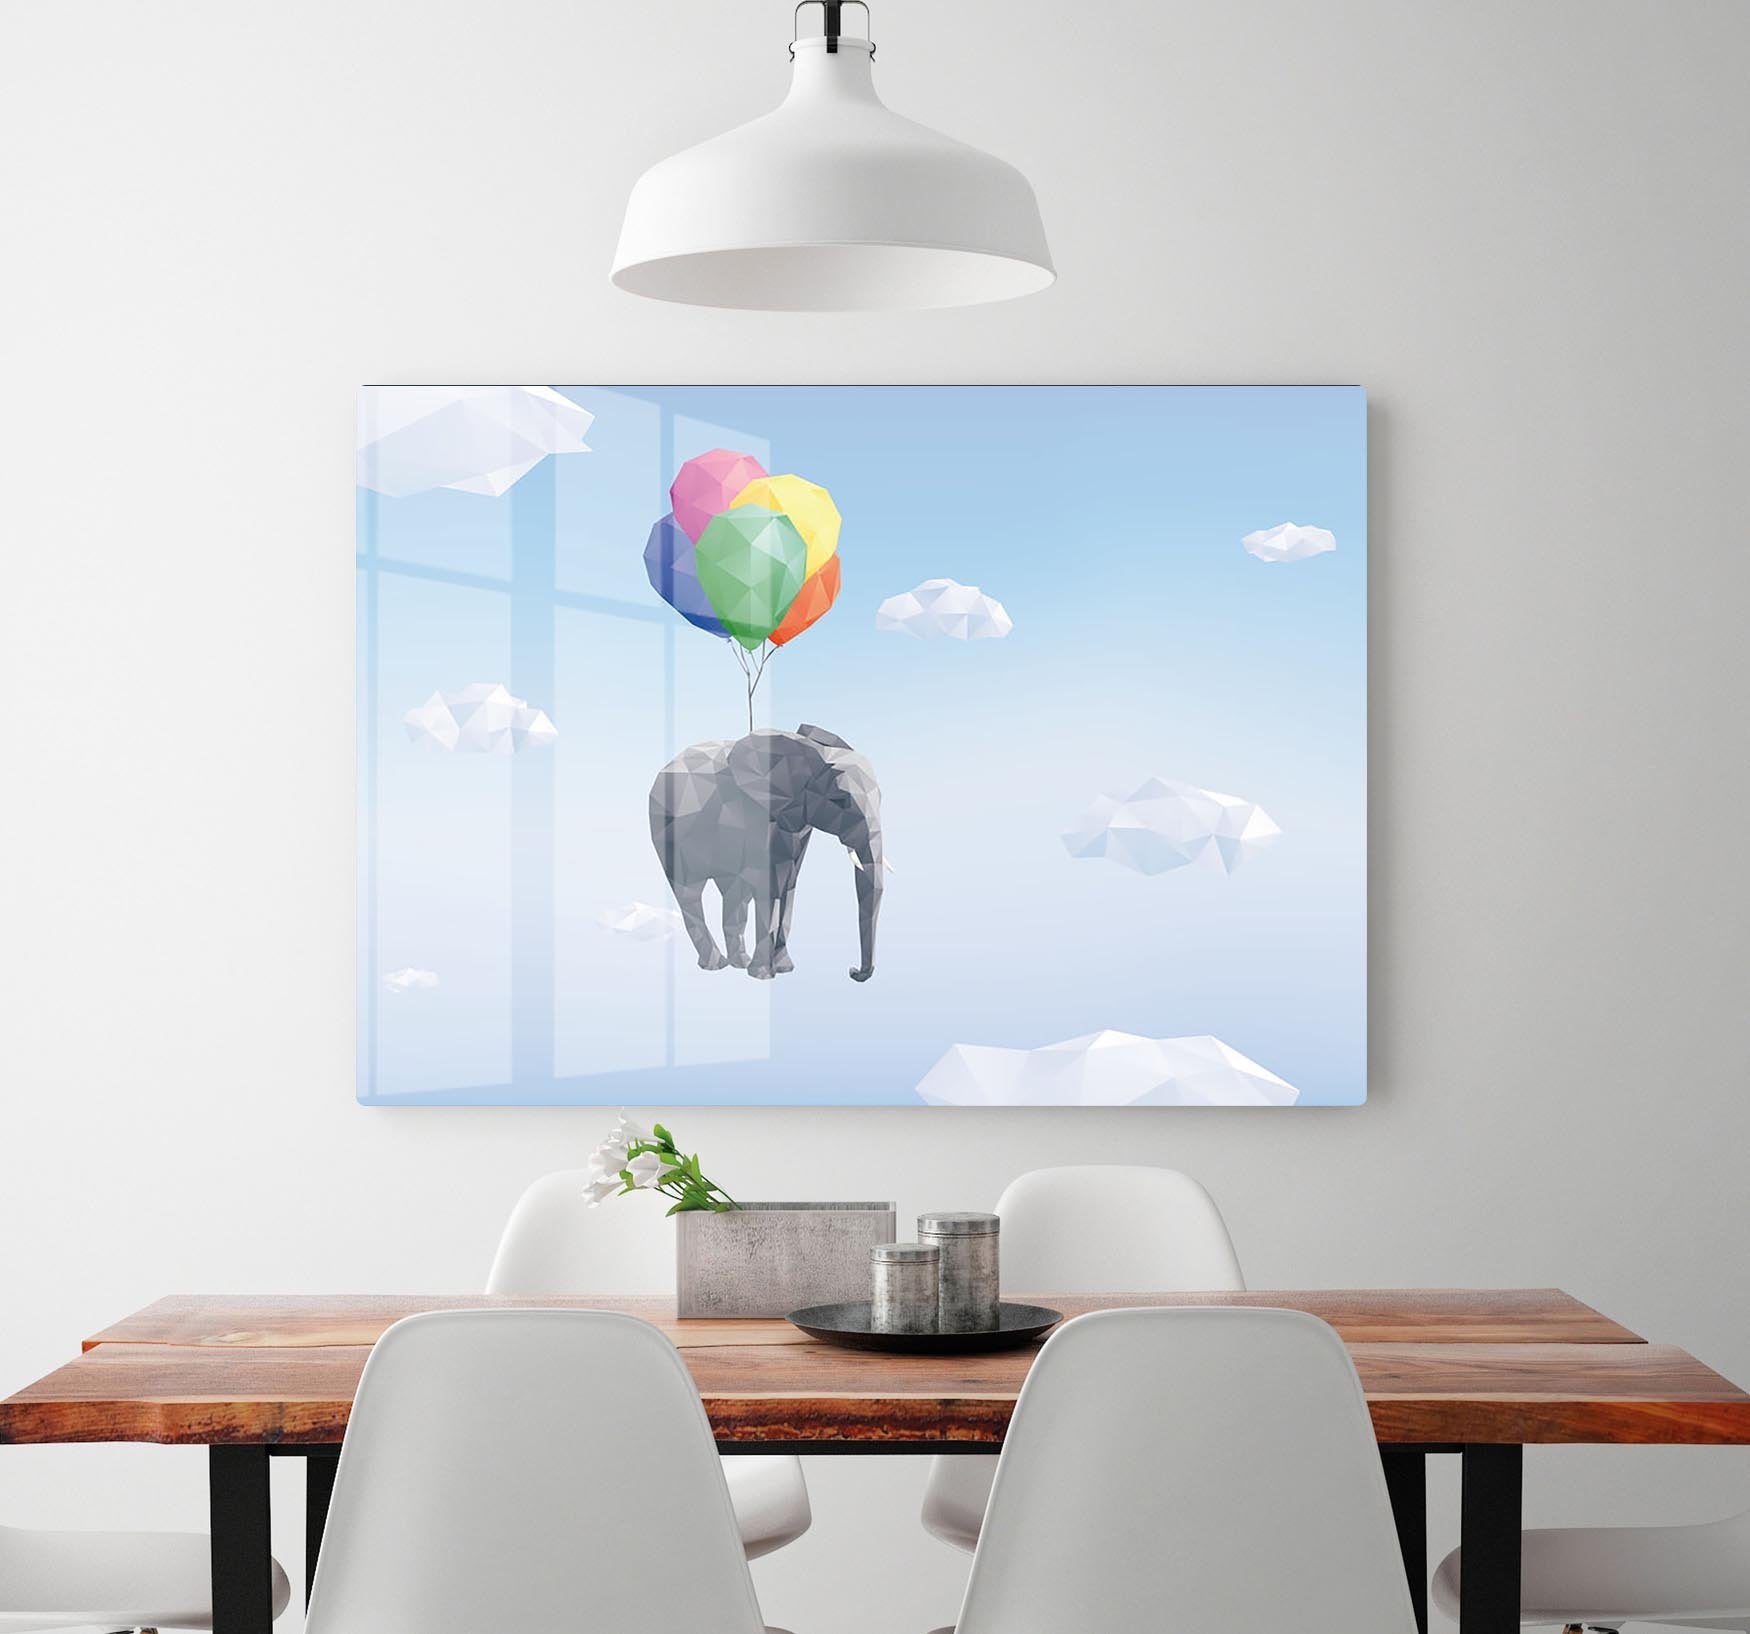 Low Poly Elephant attached to balloons flying through cloudy sky HD Metal Print - Canvas Art Rocks - 2